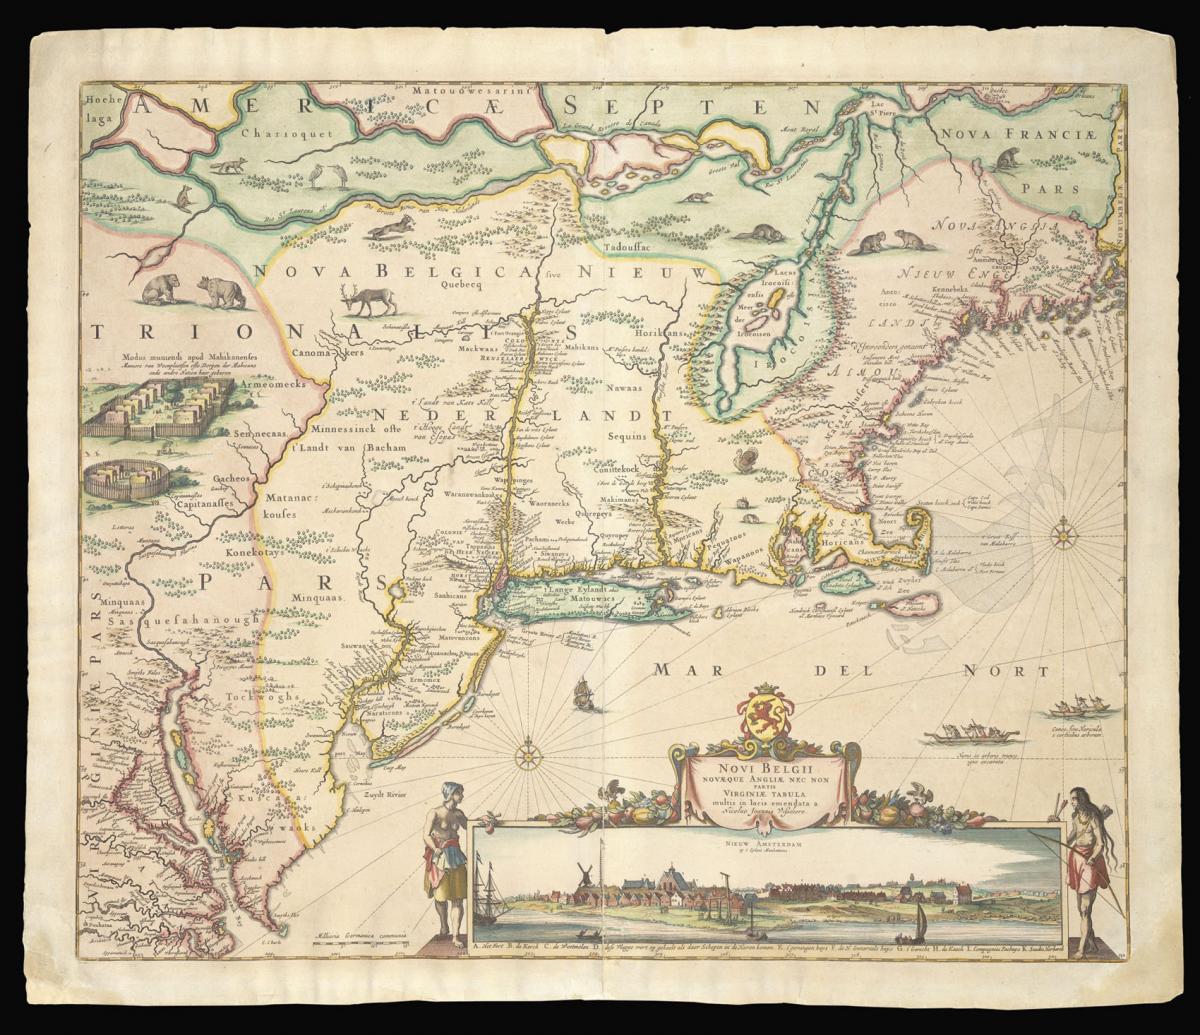 The Dutch and English colonies in Northeast America, with an iconic view of 'New Amsterdam'